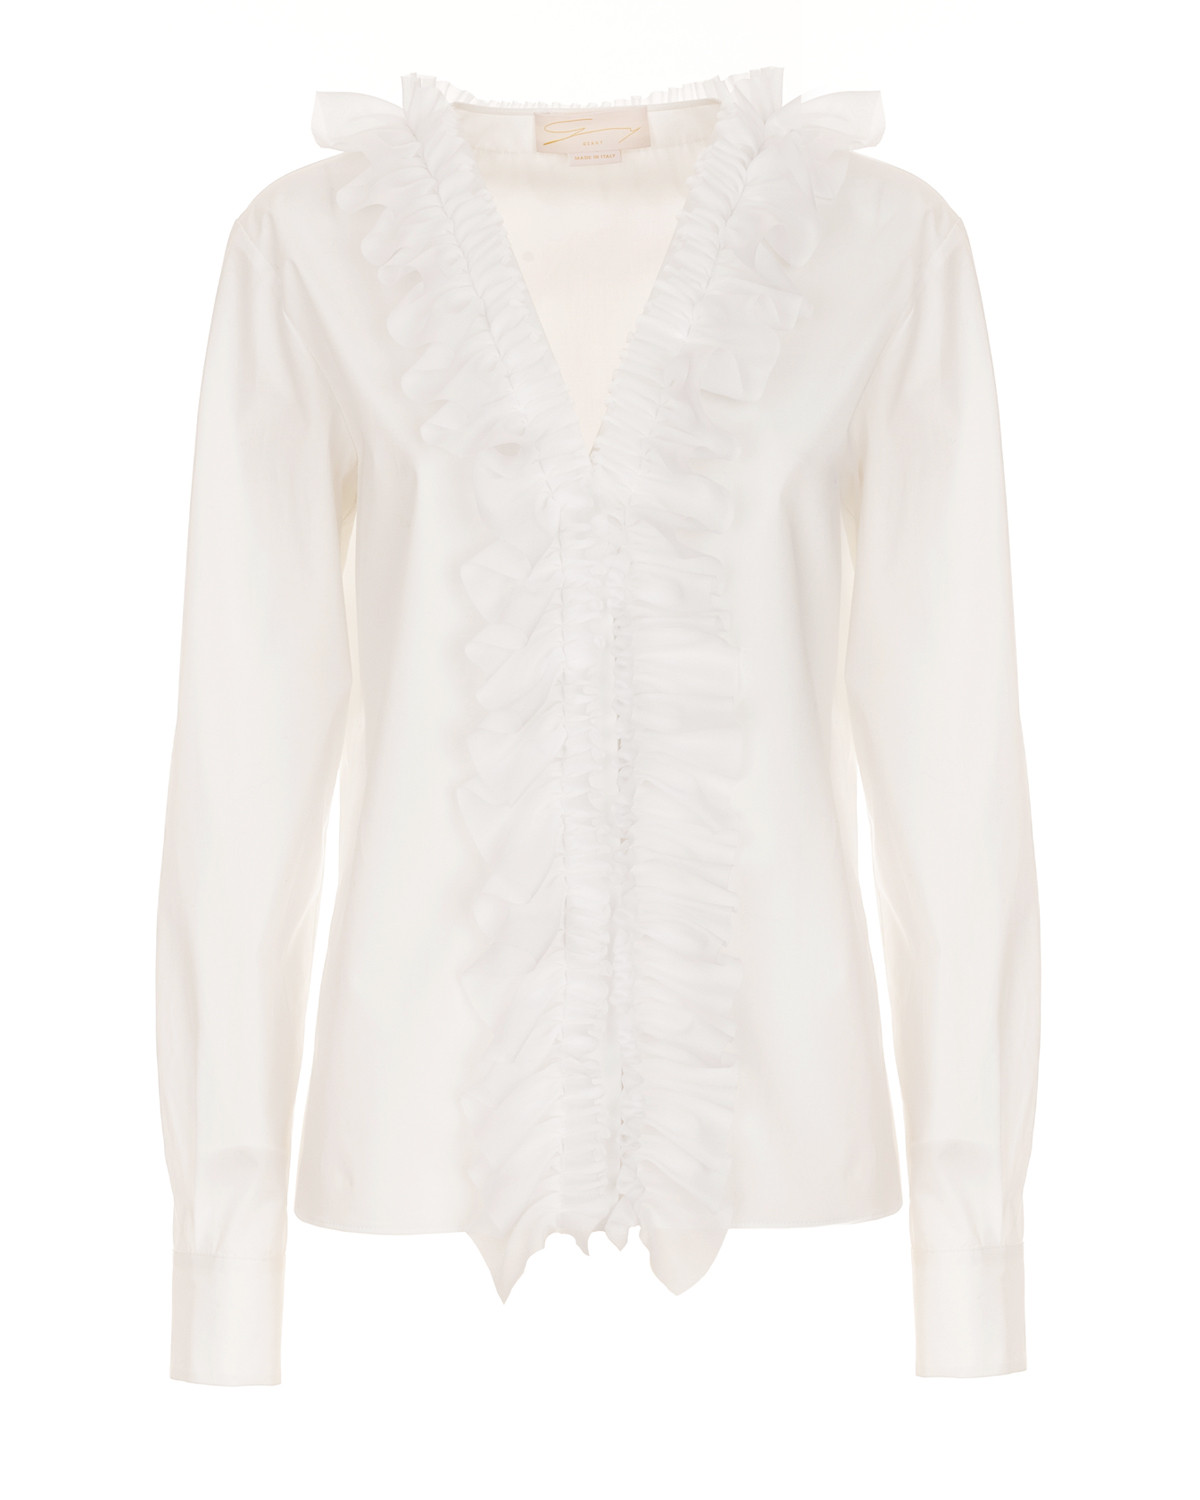 Ruched white blouse